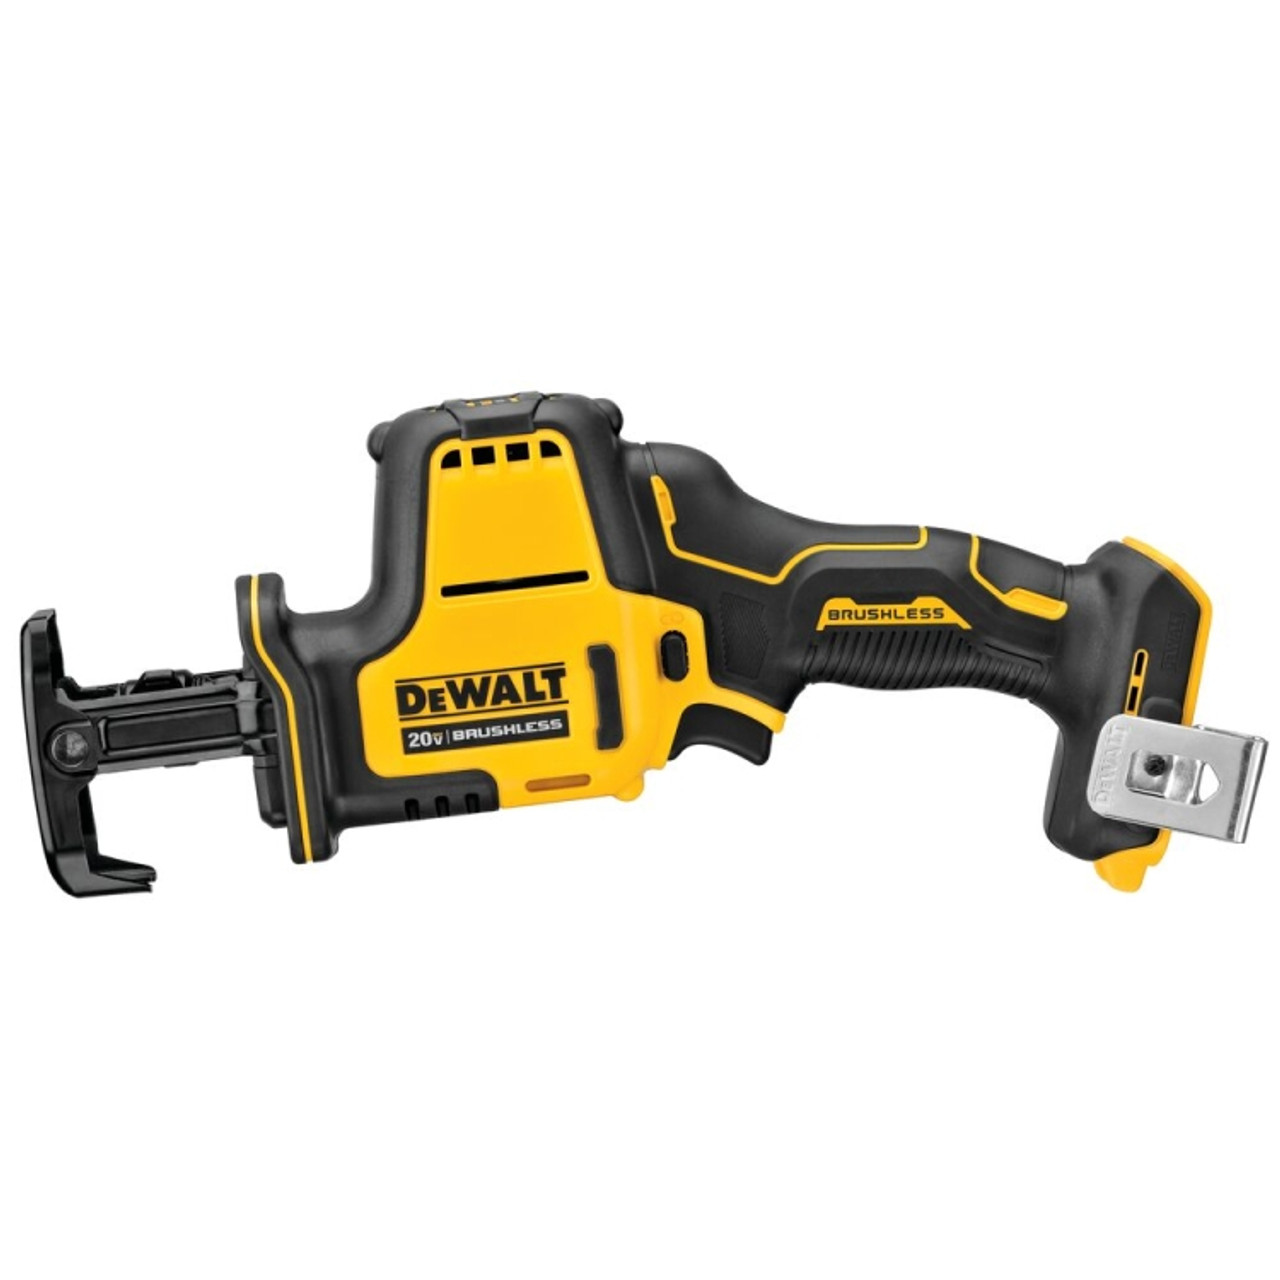 DEWALT DCS369B ATOMIC 20V MAX Cordless One-Handed Reciprocating Saw (Tool Only) - 1